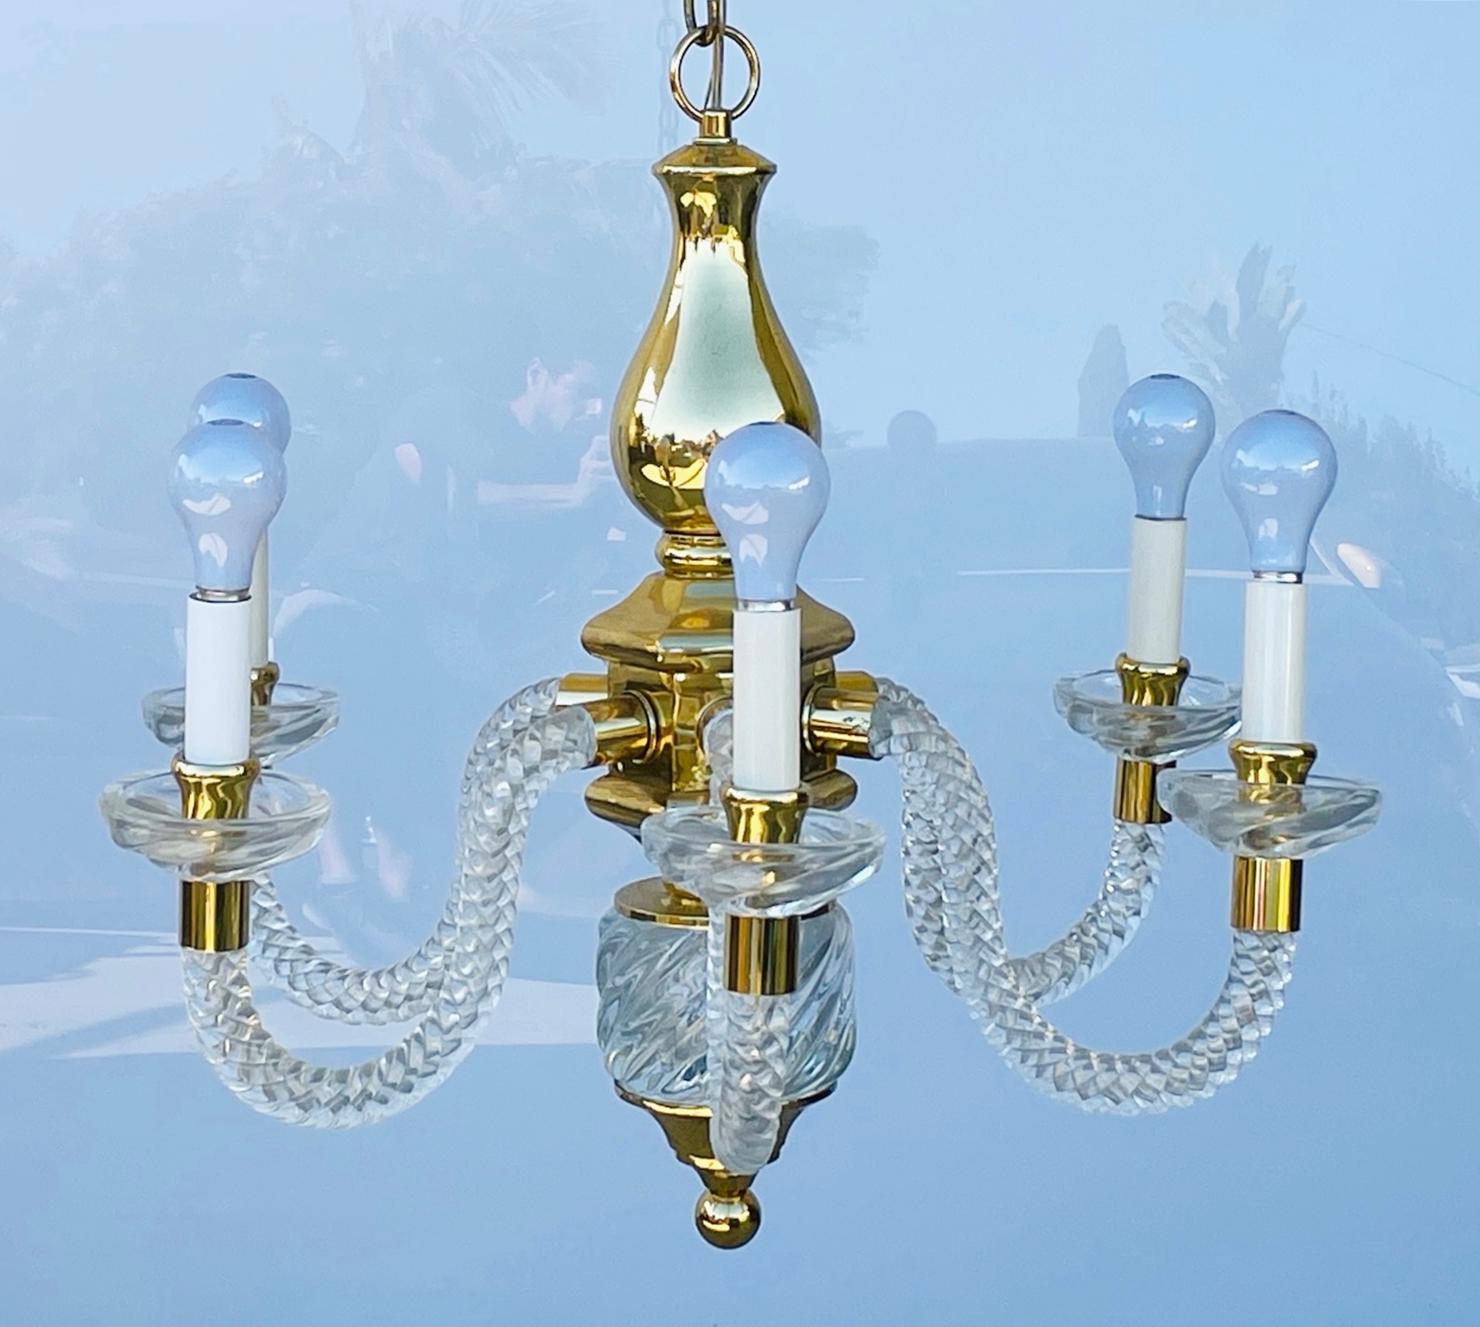 Introducing the exquisite 6 Arm Murano Glass & Brass Chandelier, a stunning vintage piece originating from Italy in the glamorous era of the 1970's. This captivating chandelier effortlessly combines the timeless elegance of Murano glass